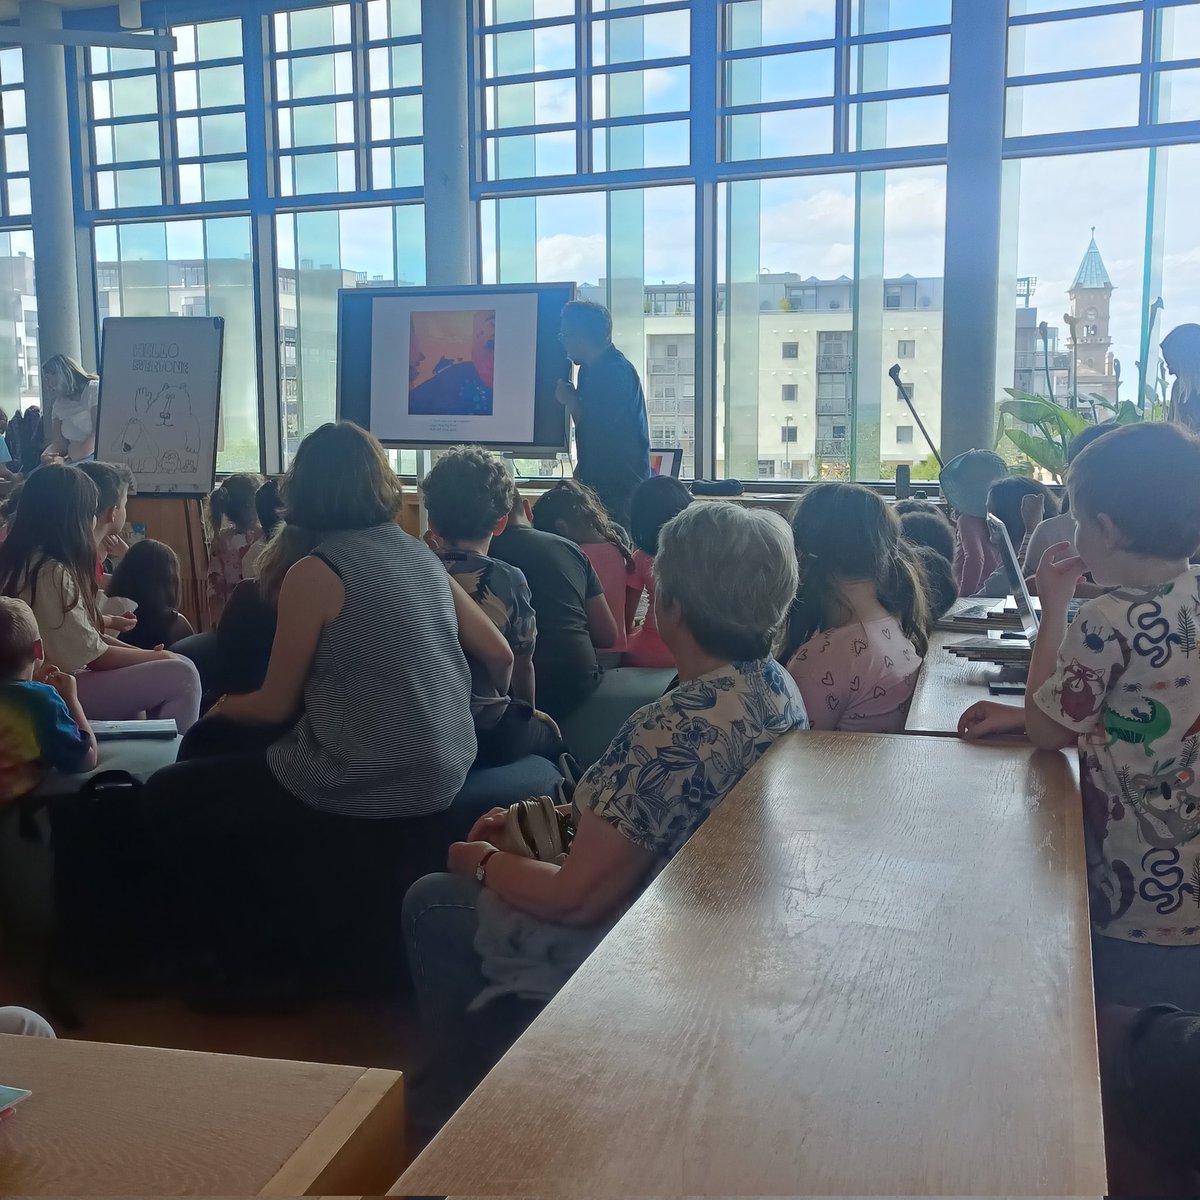 We had Chris Haughton and his sister Lynn at @dlrLexIcon Family Fun day today. Chris is the author of our current #ScéalTrail 'Don't Worry Little Crab' and kindly donated George from 'Oh No, George' fame to the library. See if you can find George when you next visit! #Coastival